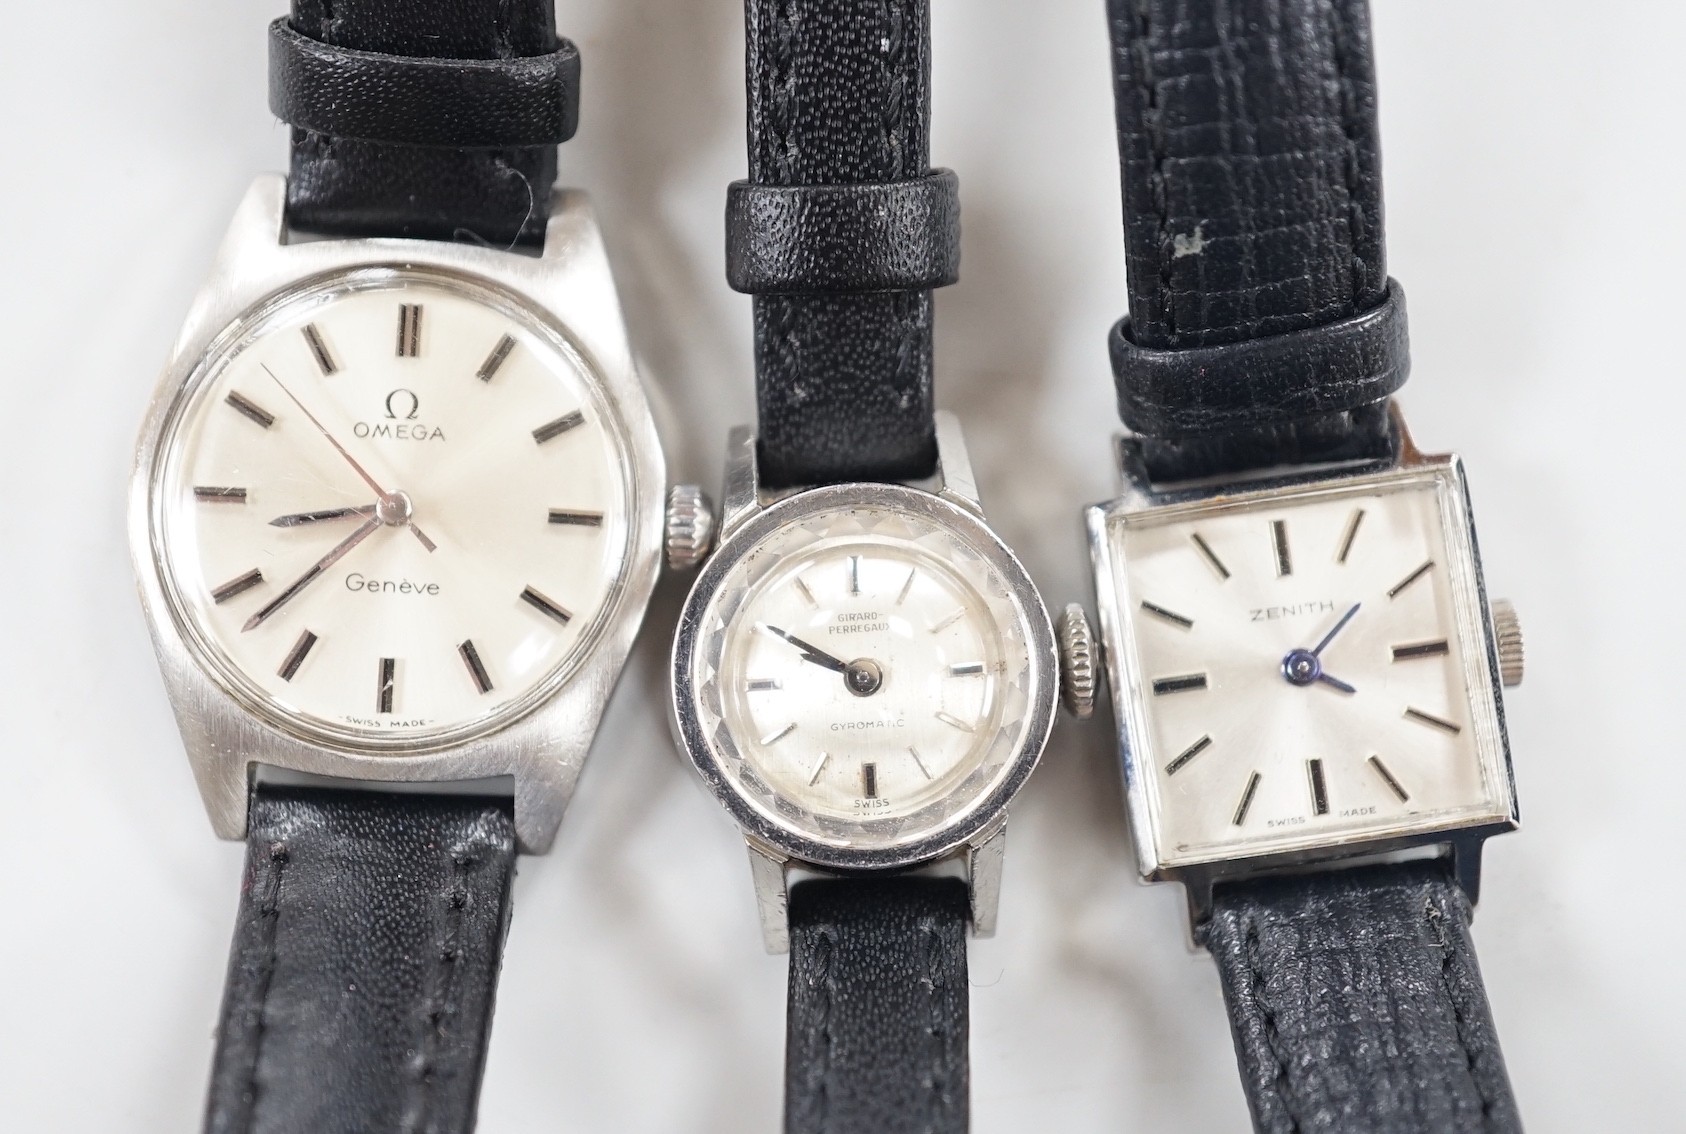 A lady's stainless steel Omega manual wind wrist watch, with baton numerals, together with a lady's stainless steel Zenith square dial manual wind wrist watch and a similar Girard Perregaux manual wind wrist watch.